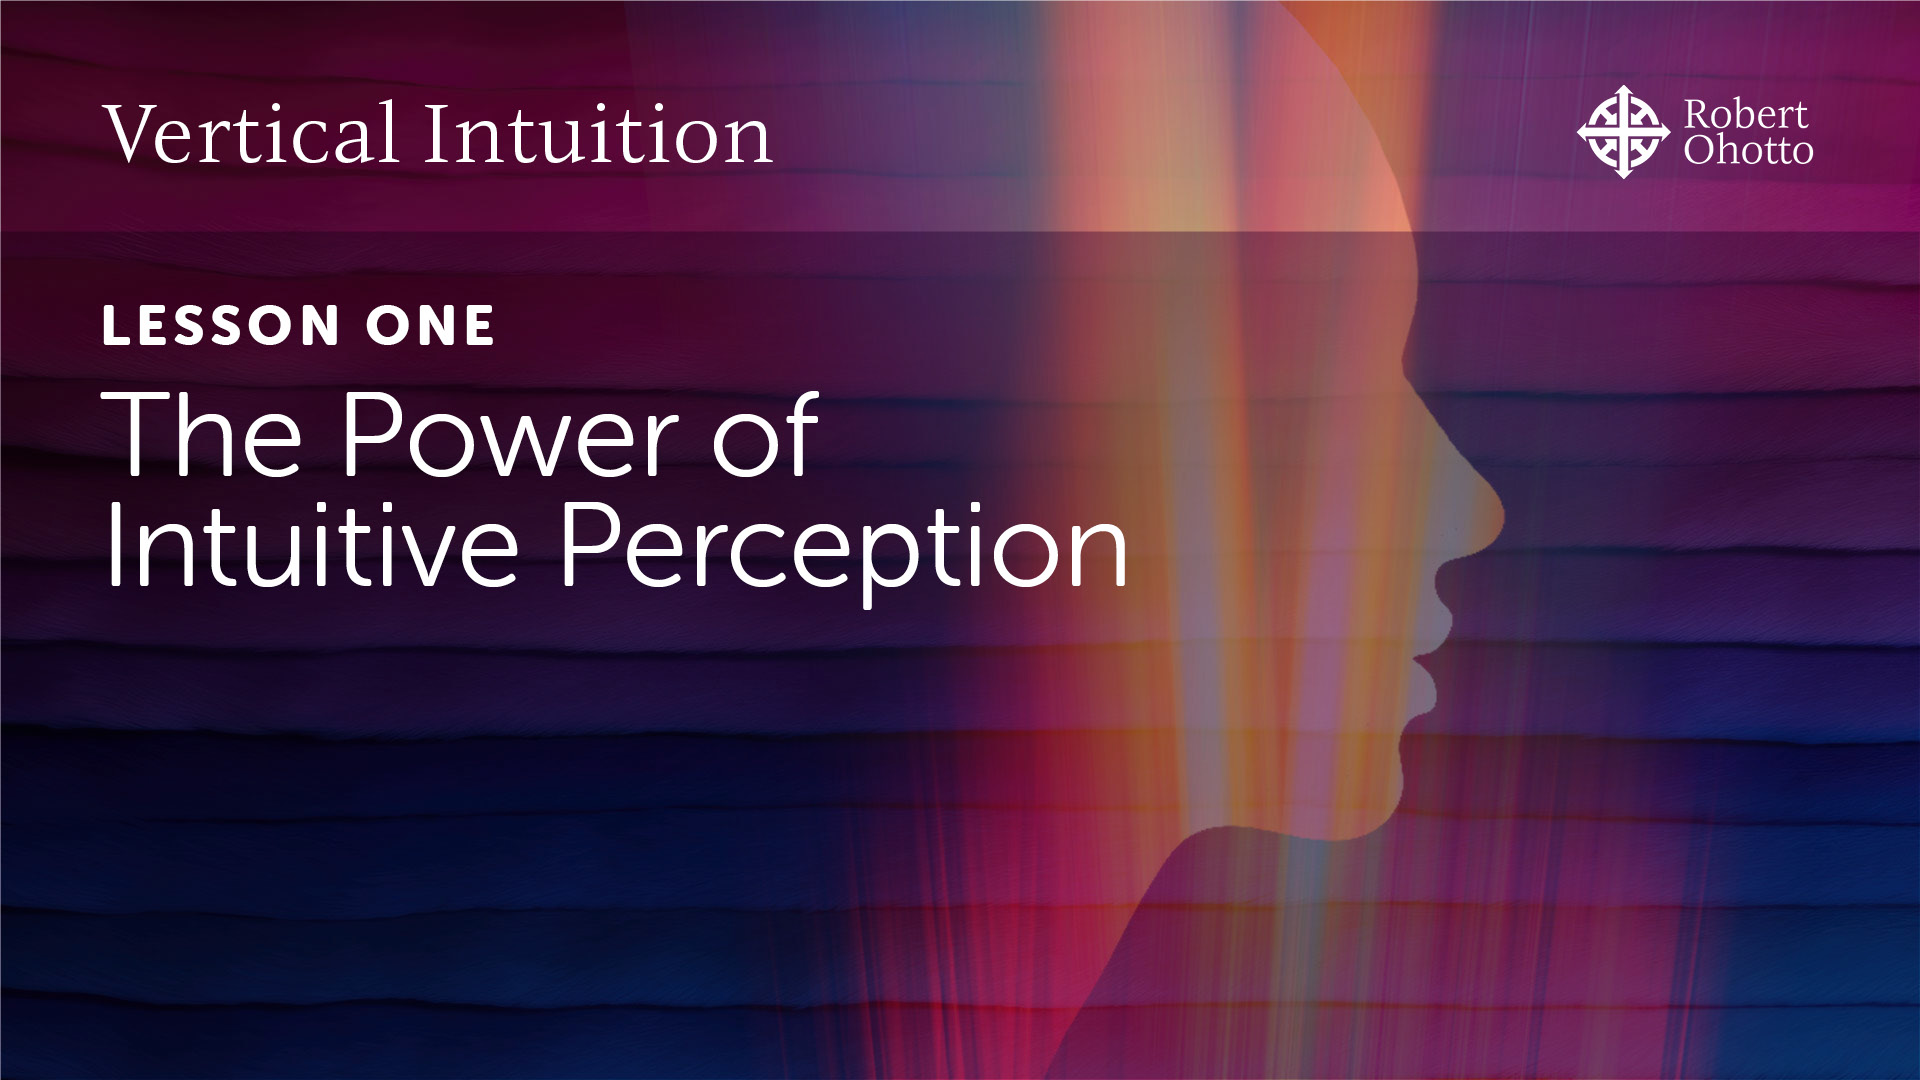 Lesson One: The Power of Intuitive Perception